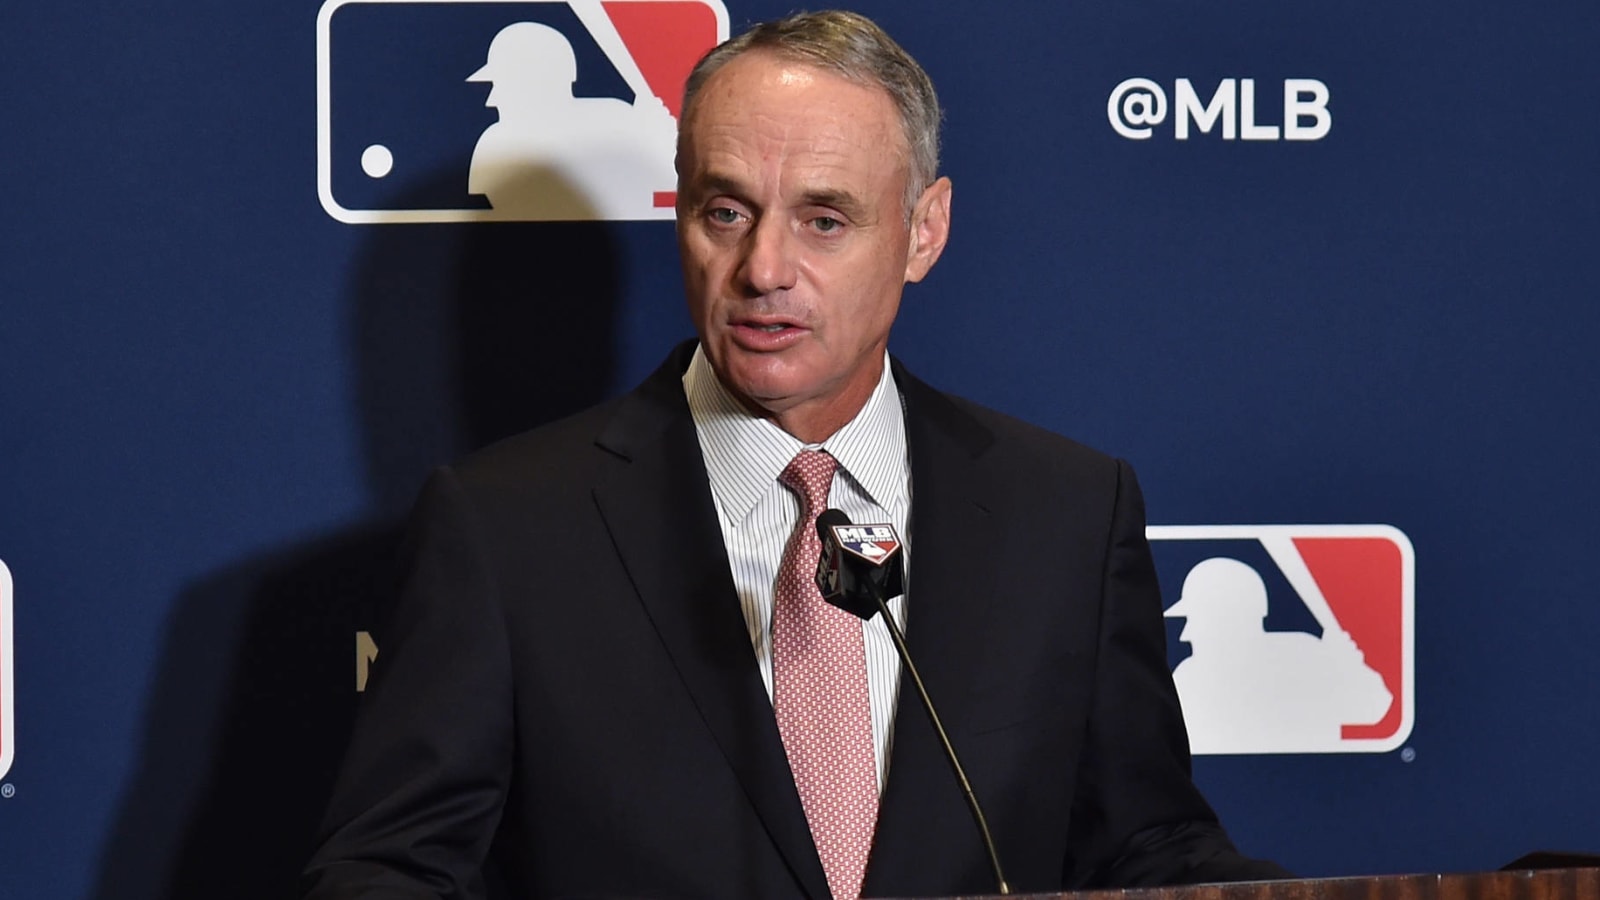 MLB season to begin July 1 with 'spring training' in June?